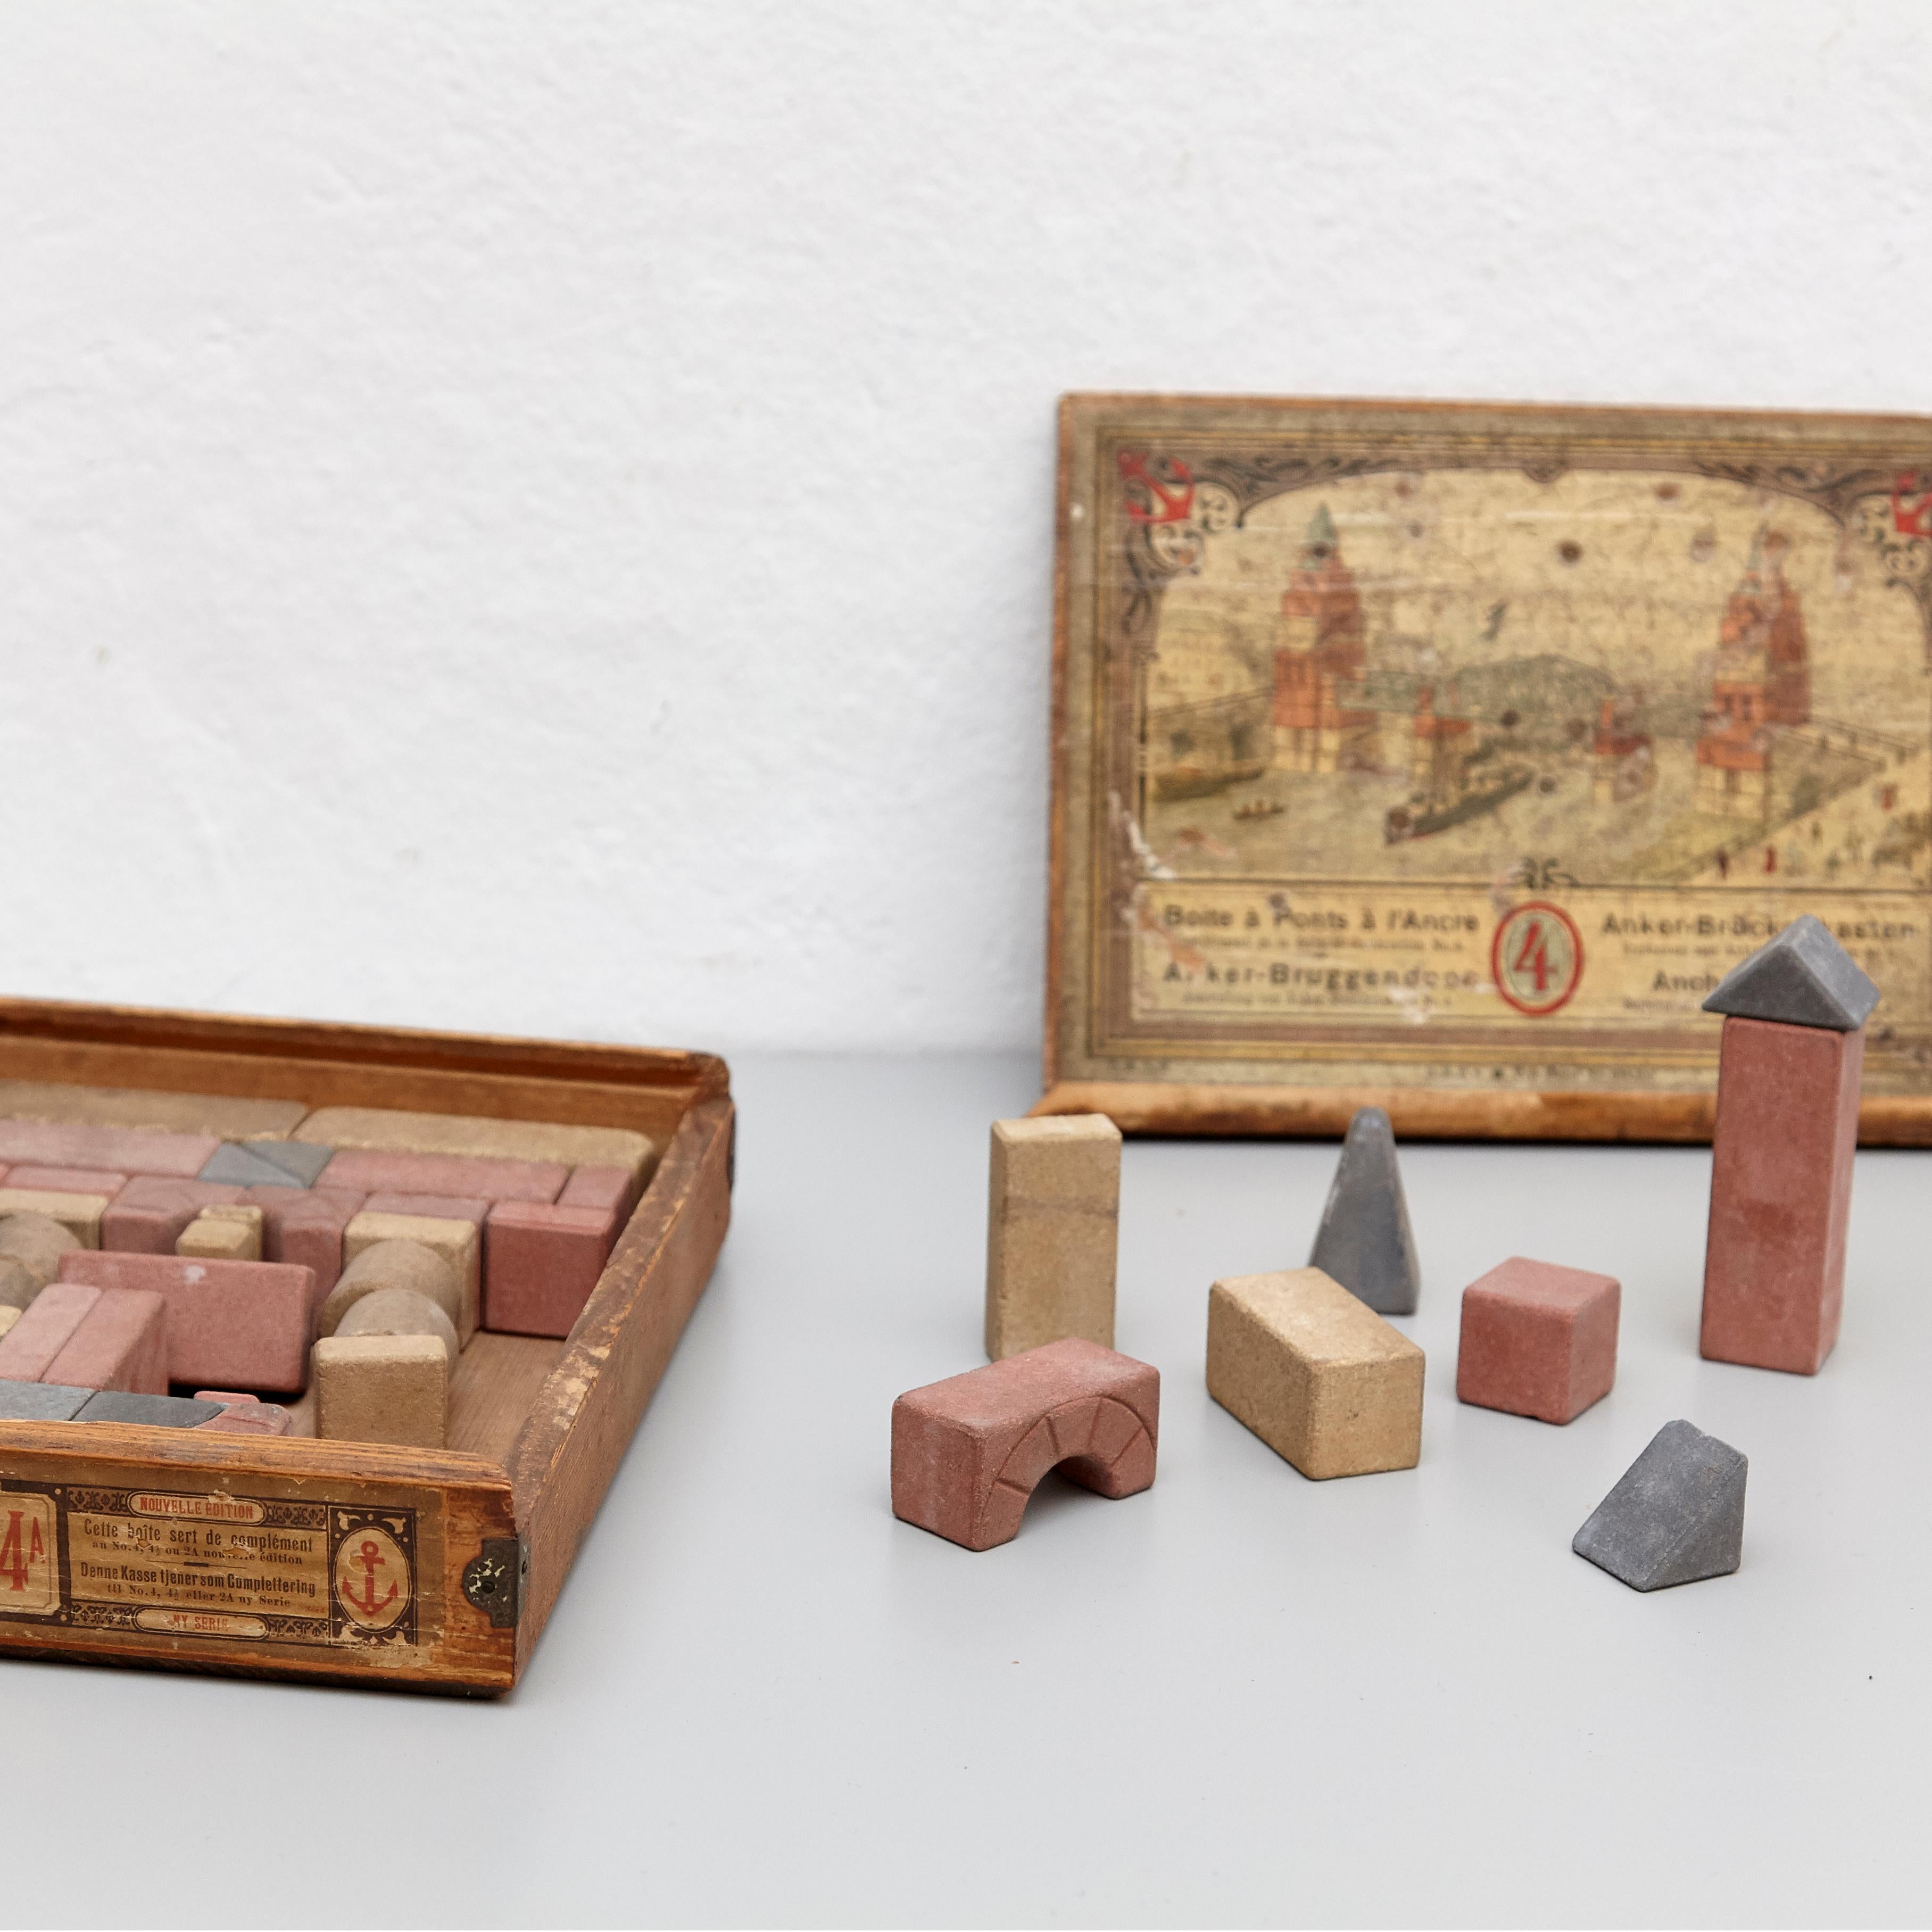 Set of 5 Richters German Anchor Stone Blocks Building Toys Germany 1900 12